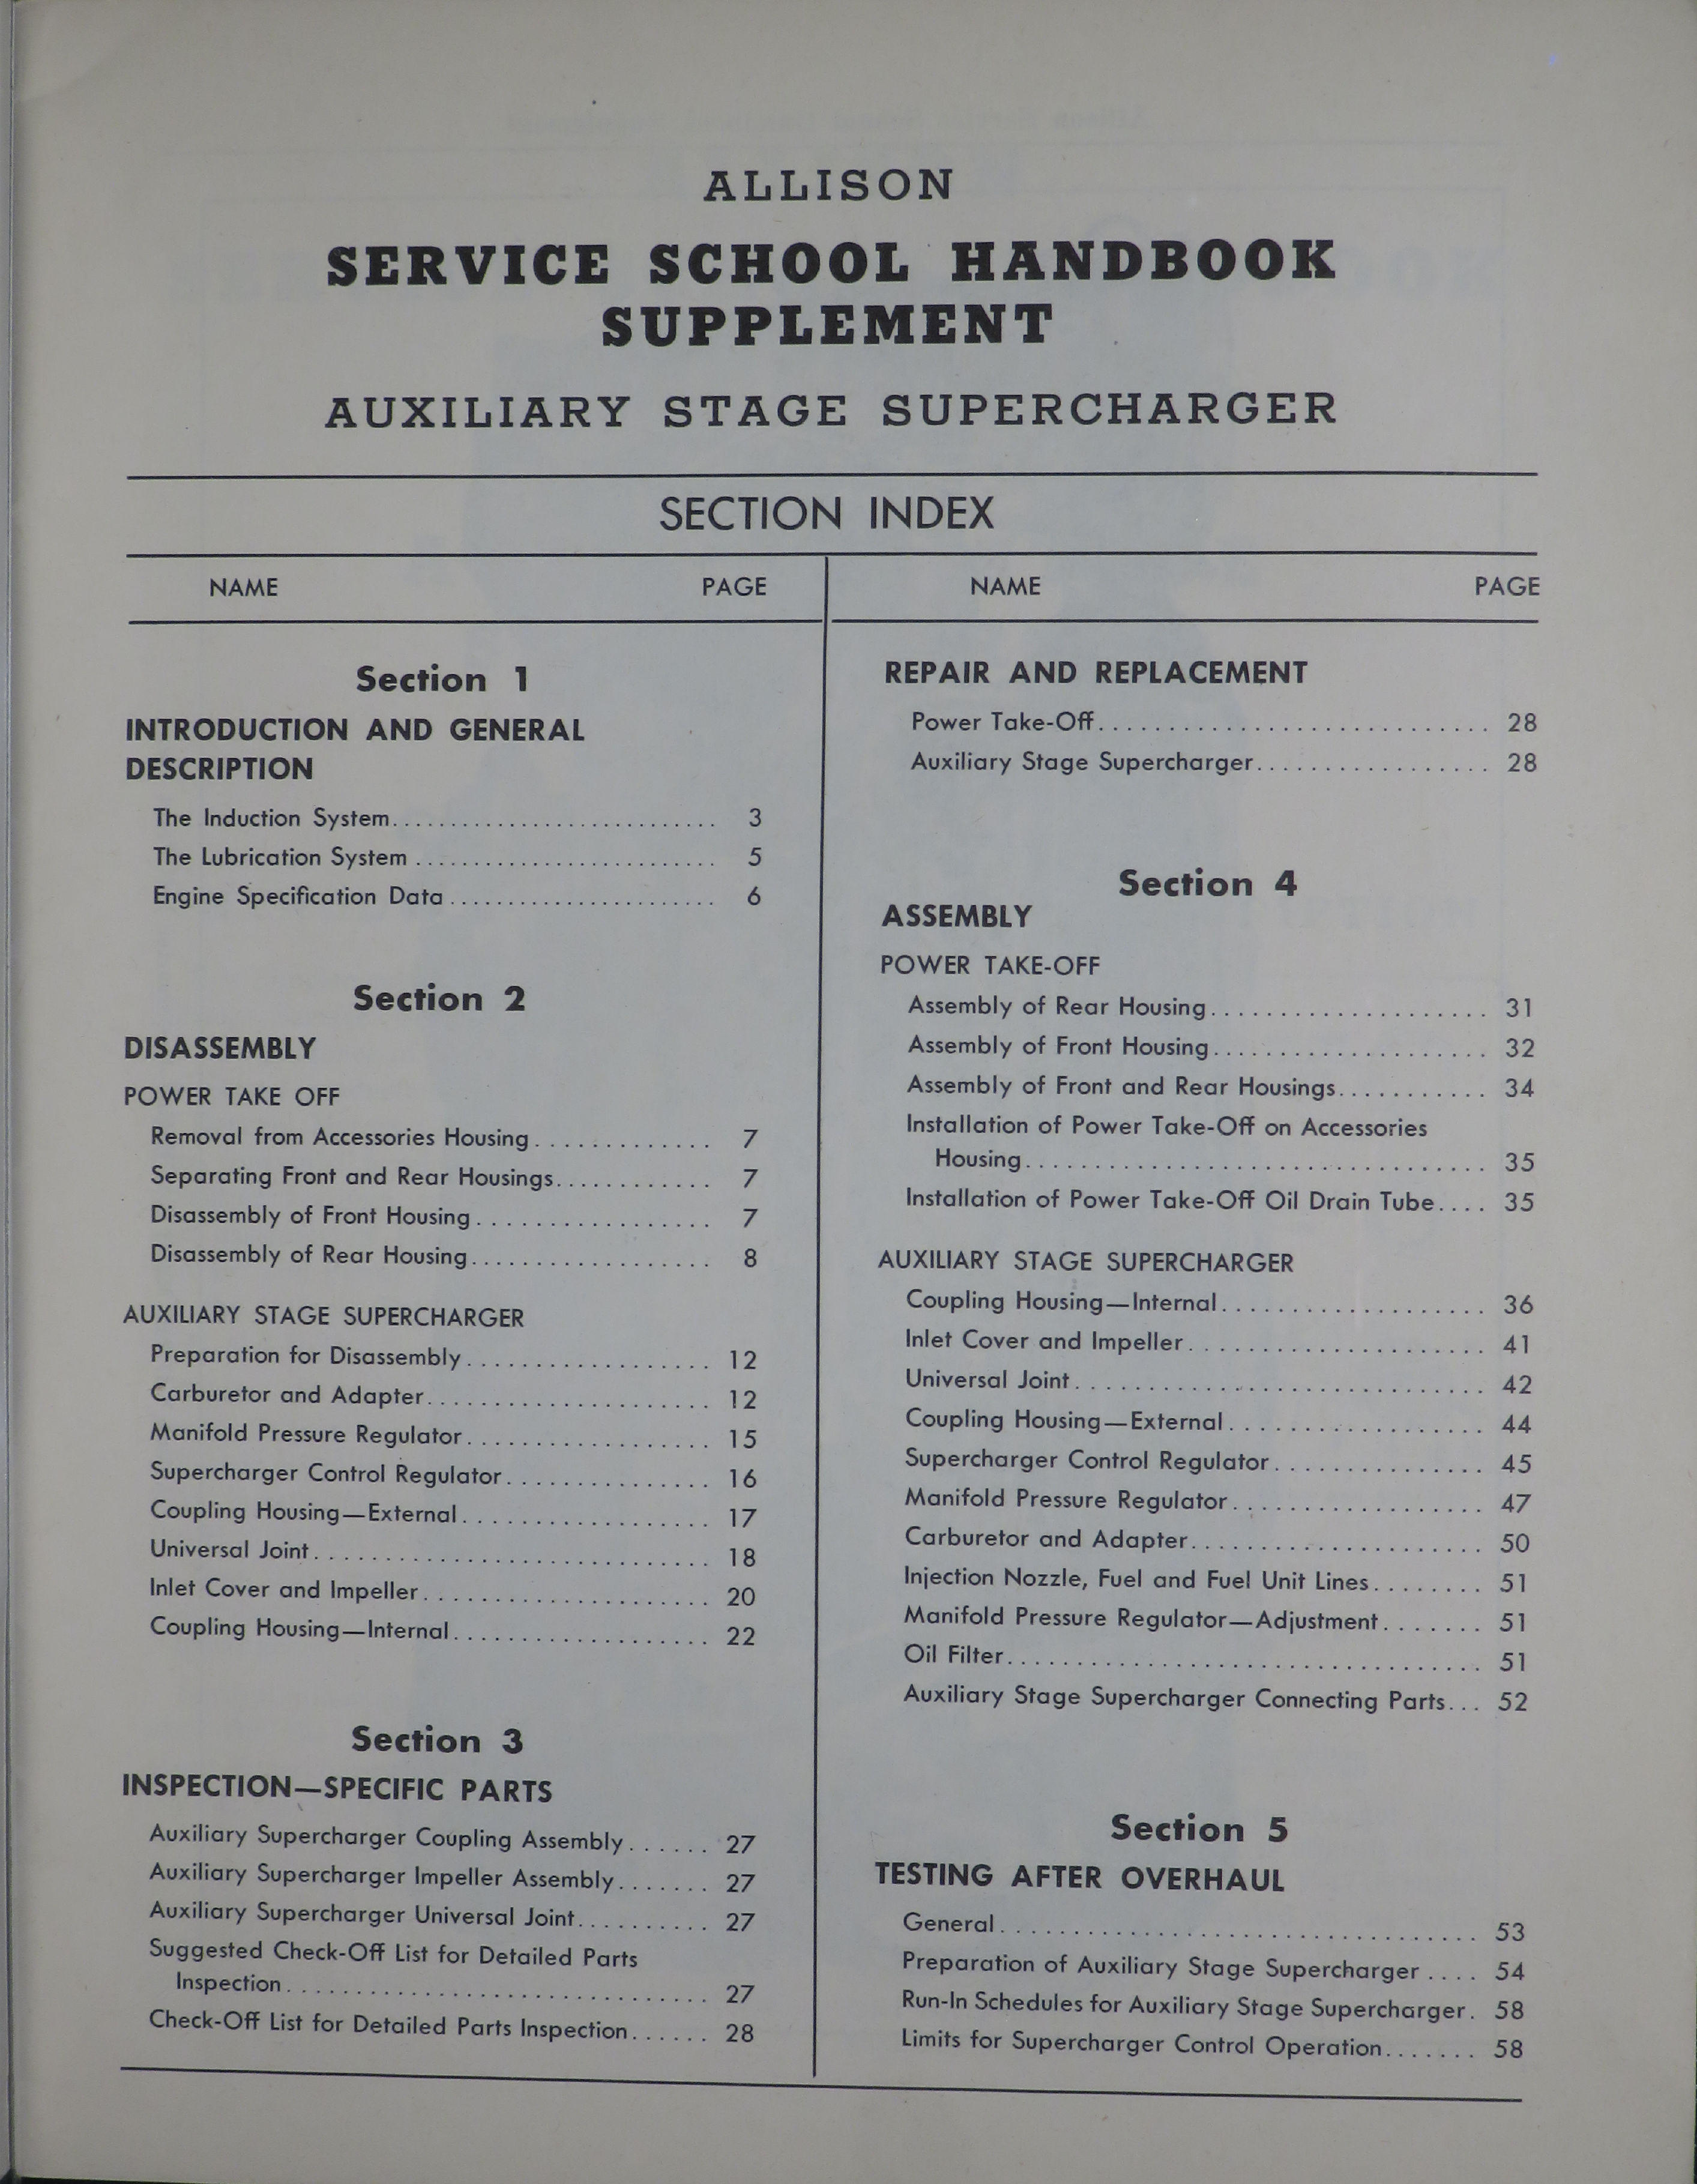 Sample page 5 from AirCorps Library document: Allison Service School Handbook Supplement for V-1710 E and F